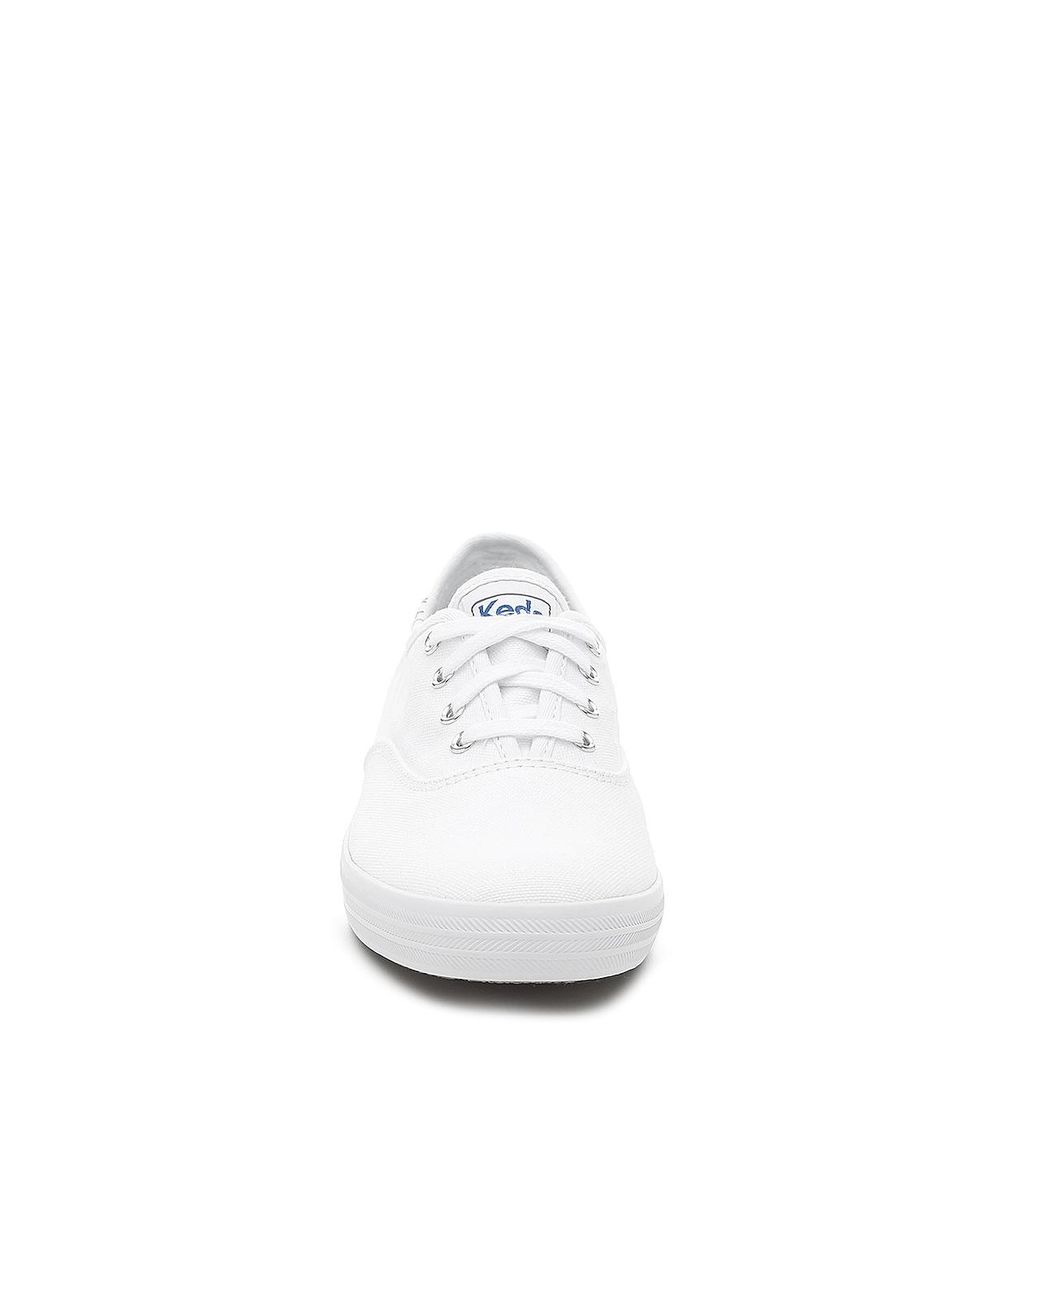 Keds Canvas Champion Daisy Eyelet Sneaker in White - Save 43% | Lyst